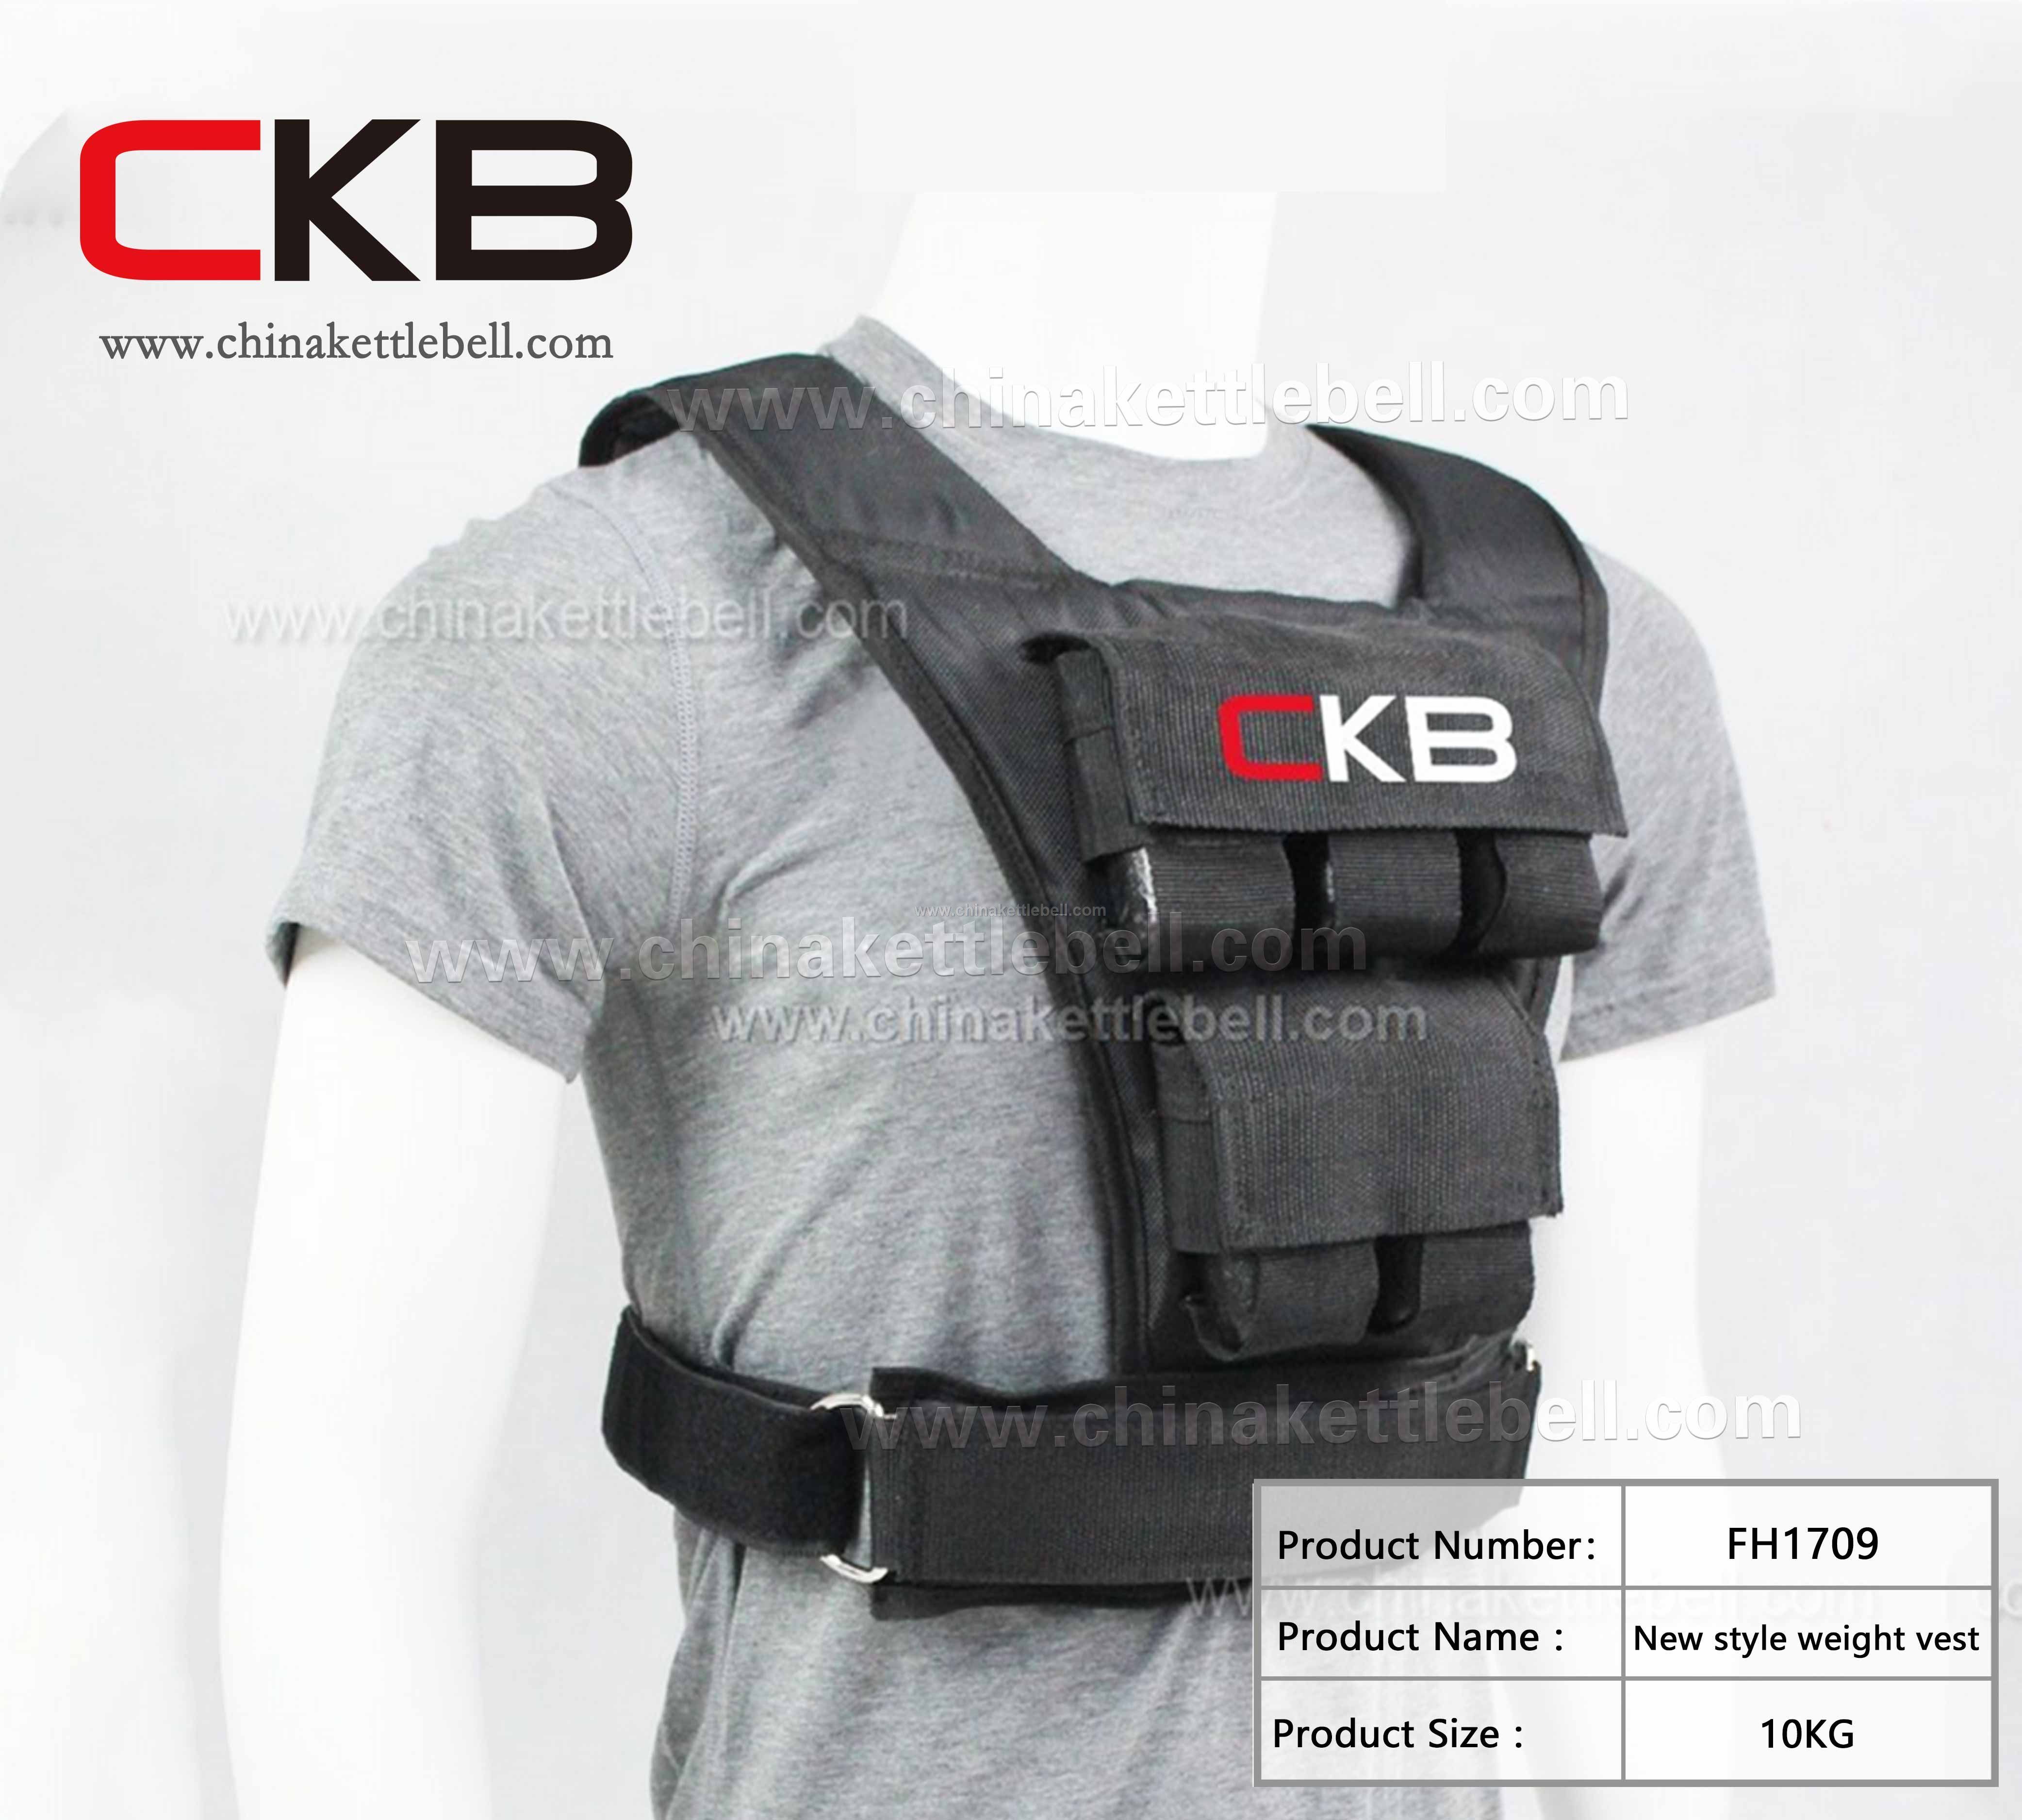 New style weight vest